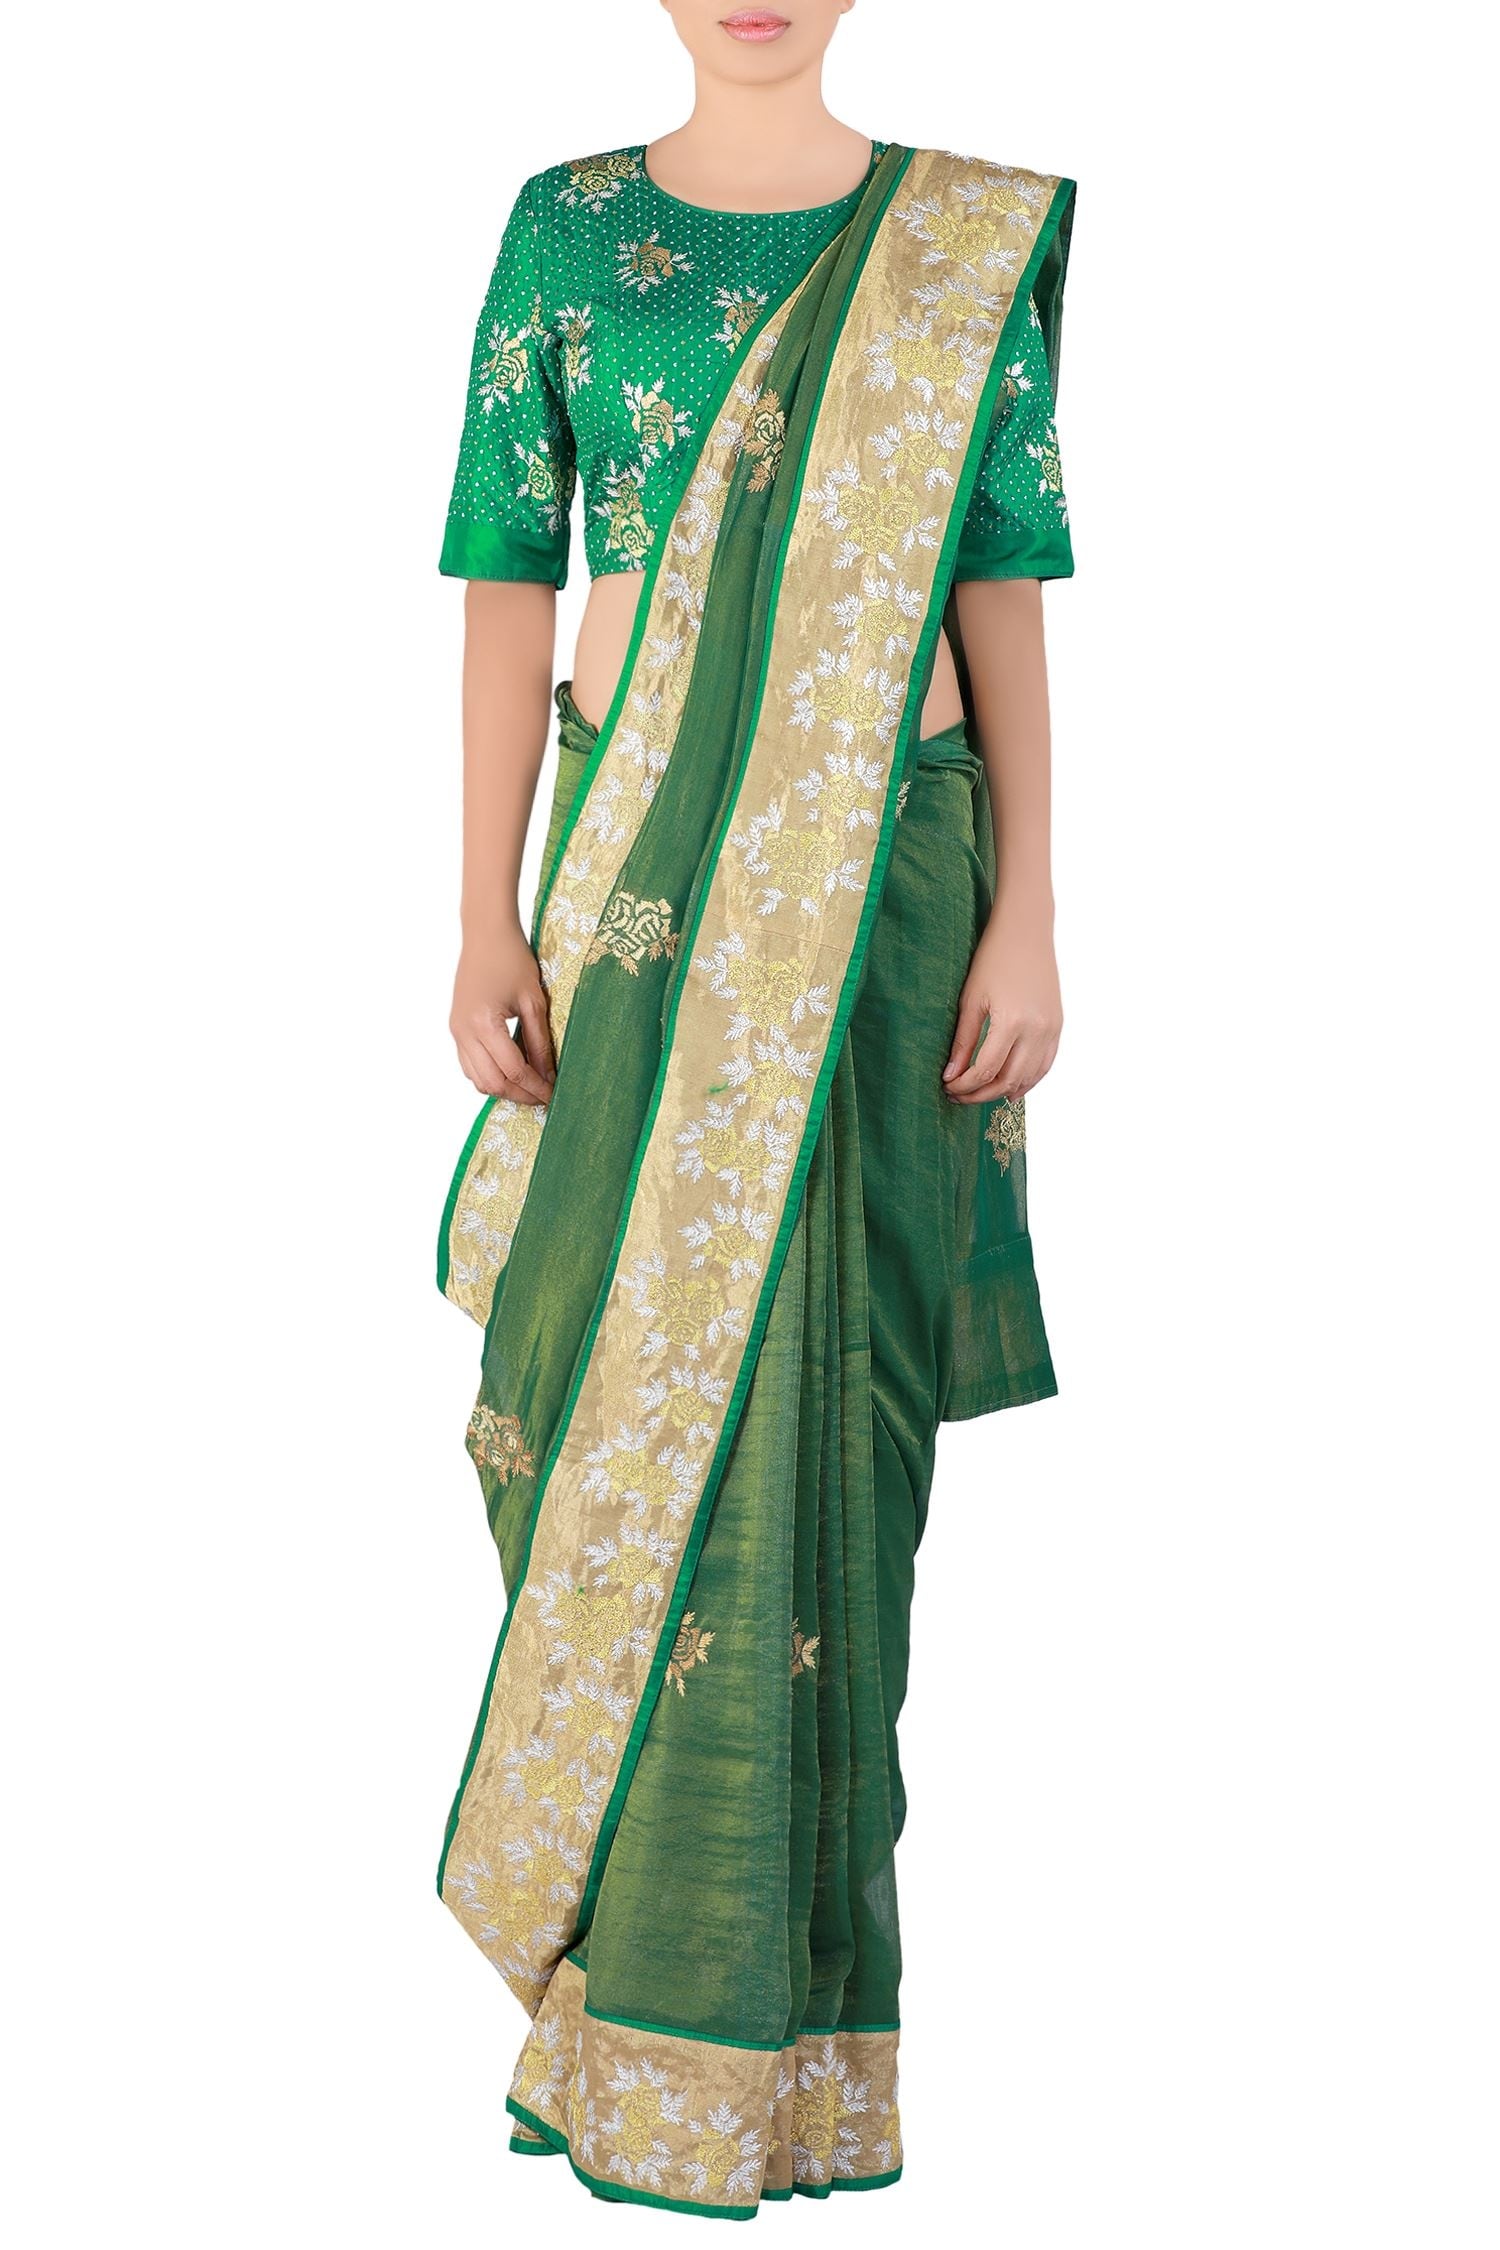 Latha Puttanna Green Embroidered Tissue Saree With Blouse For Women